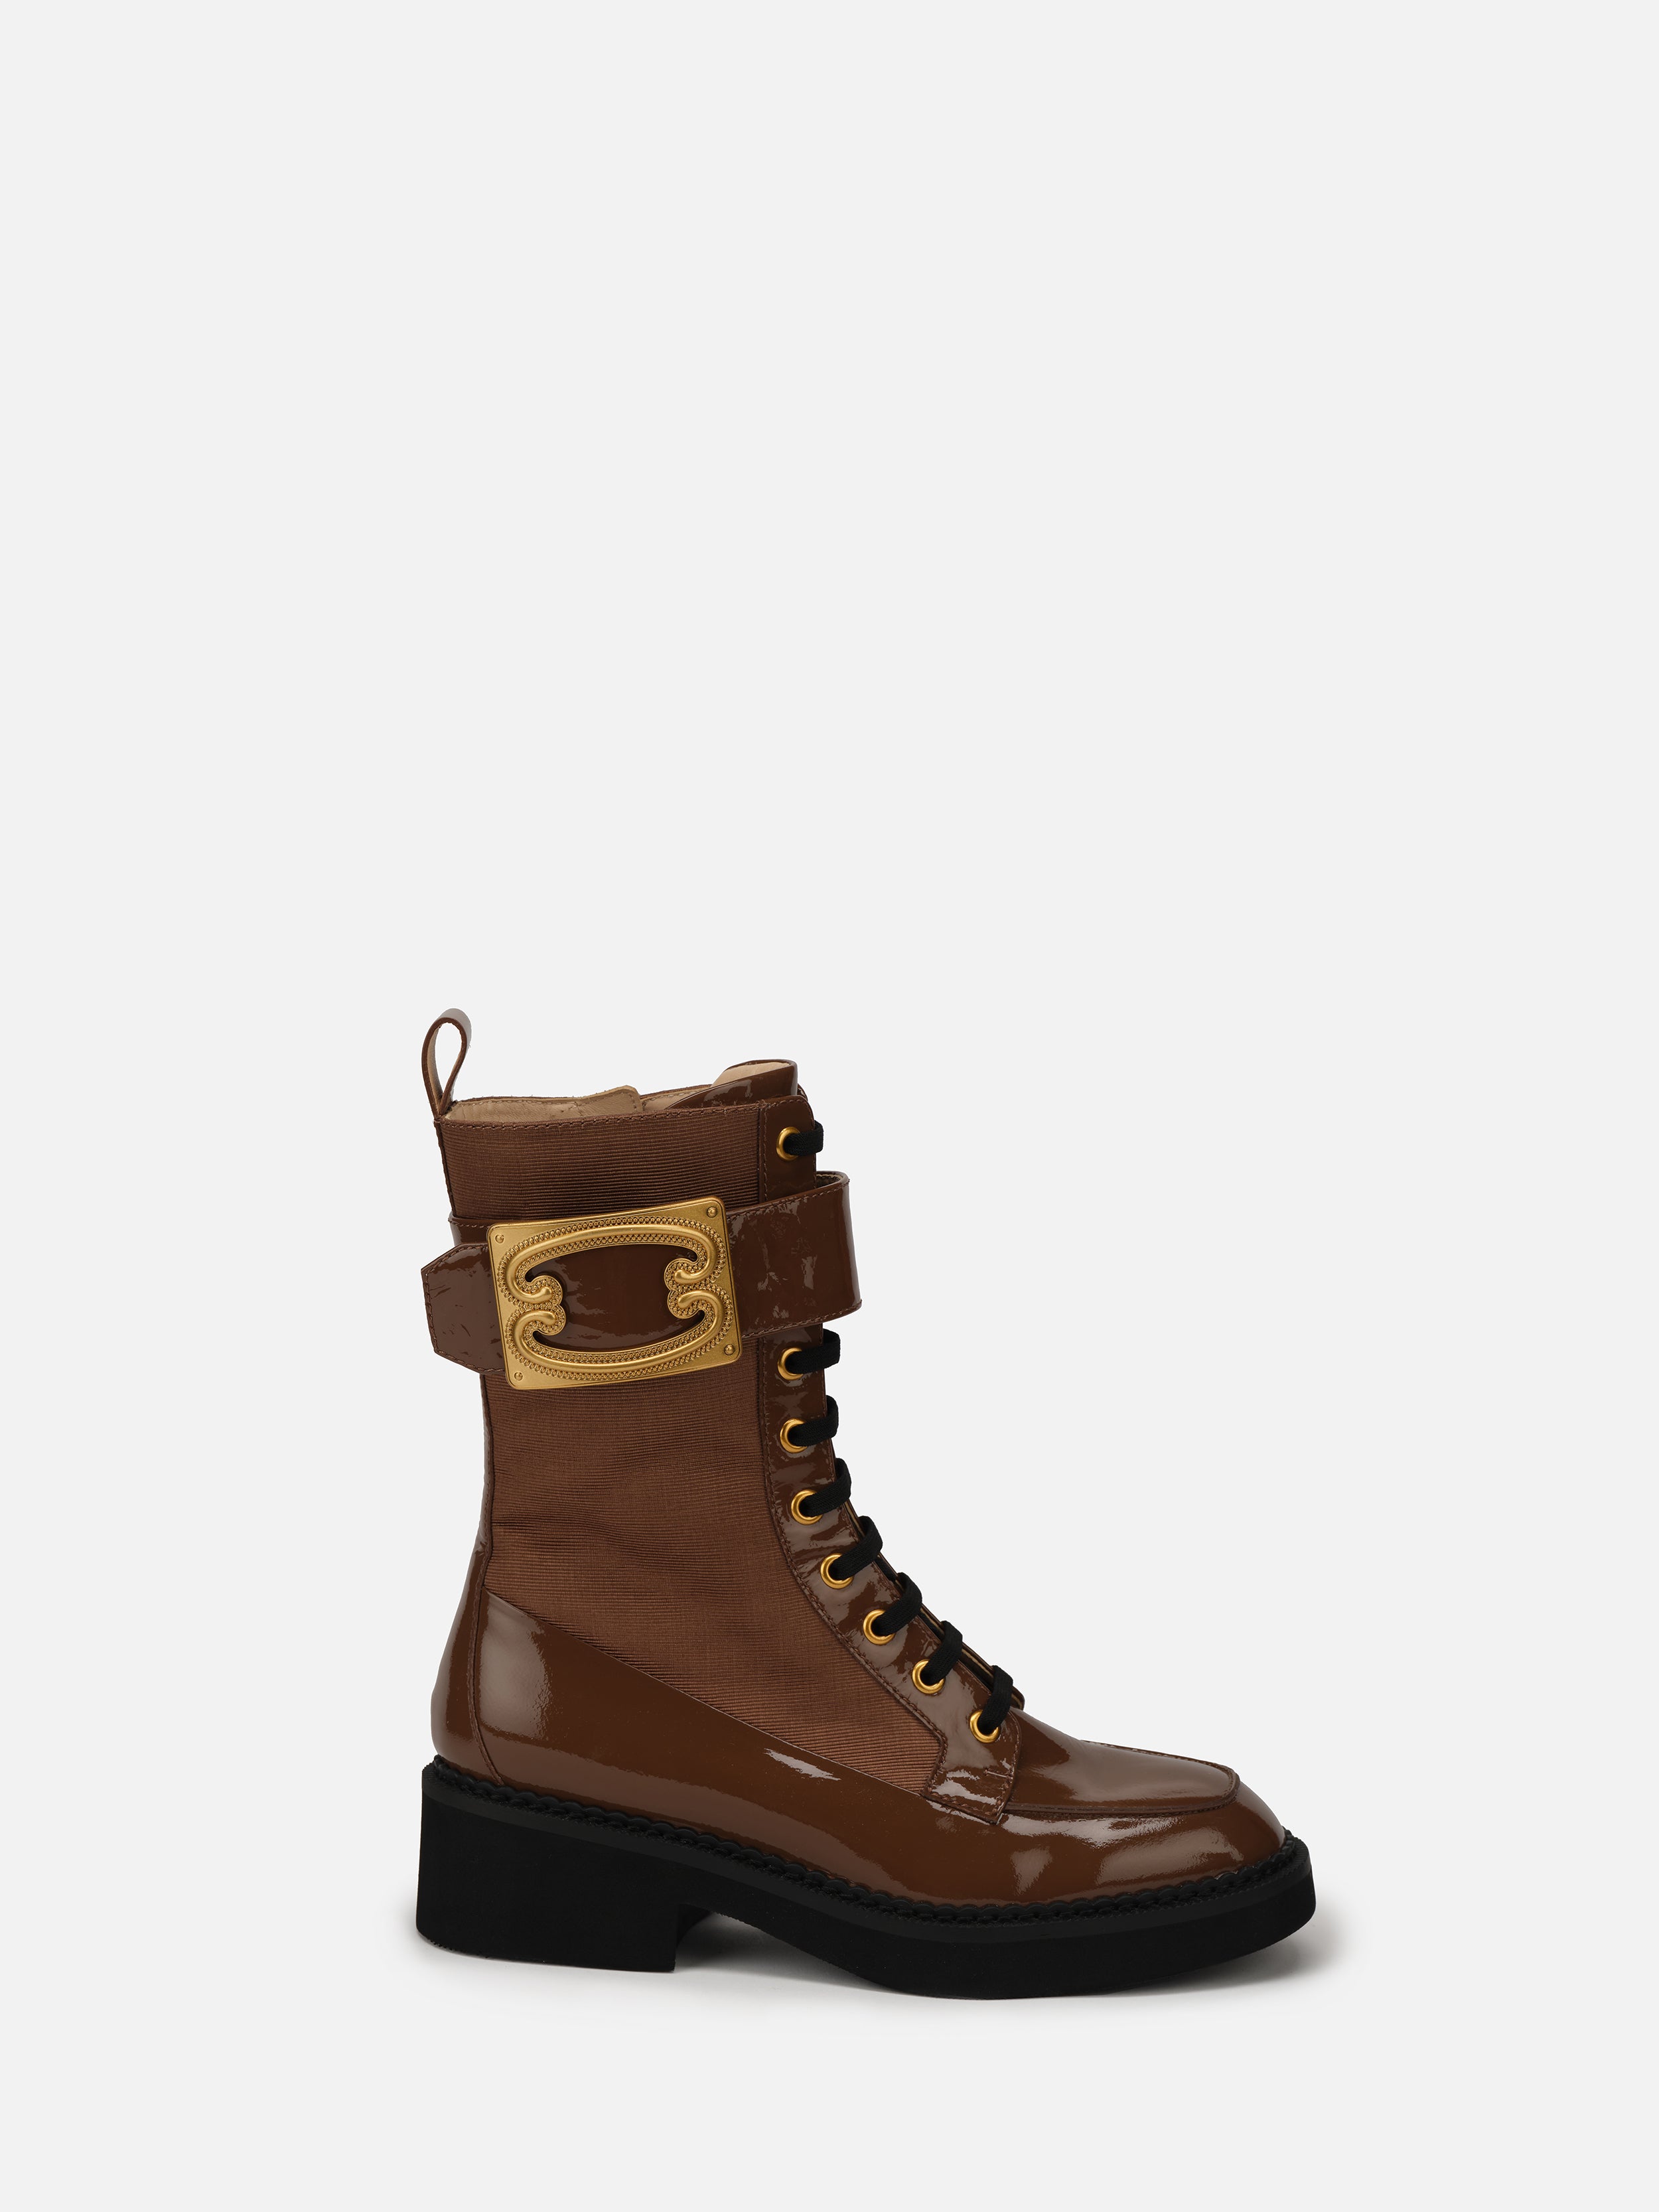 EP YAYING Metal Buckle Boots In Leather